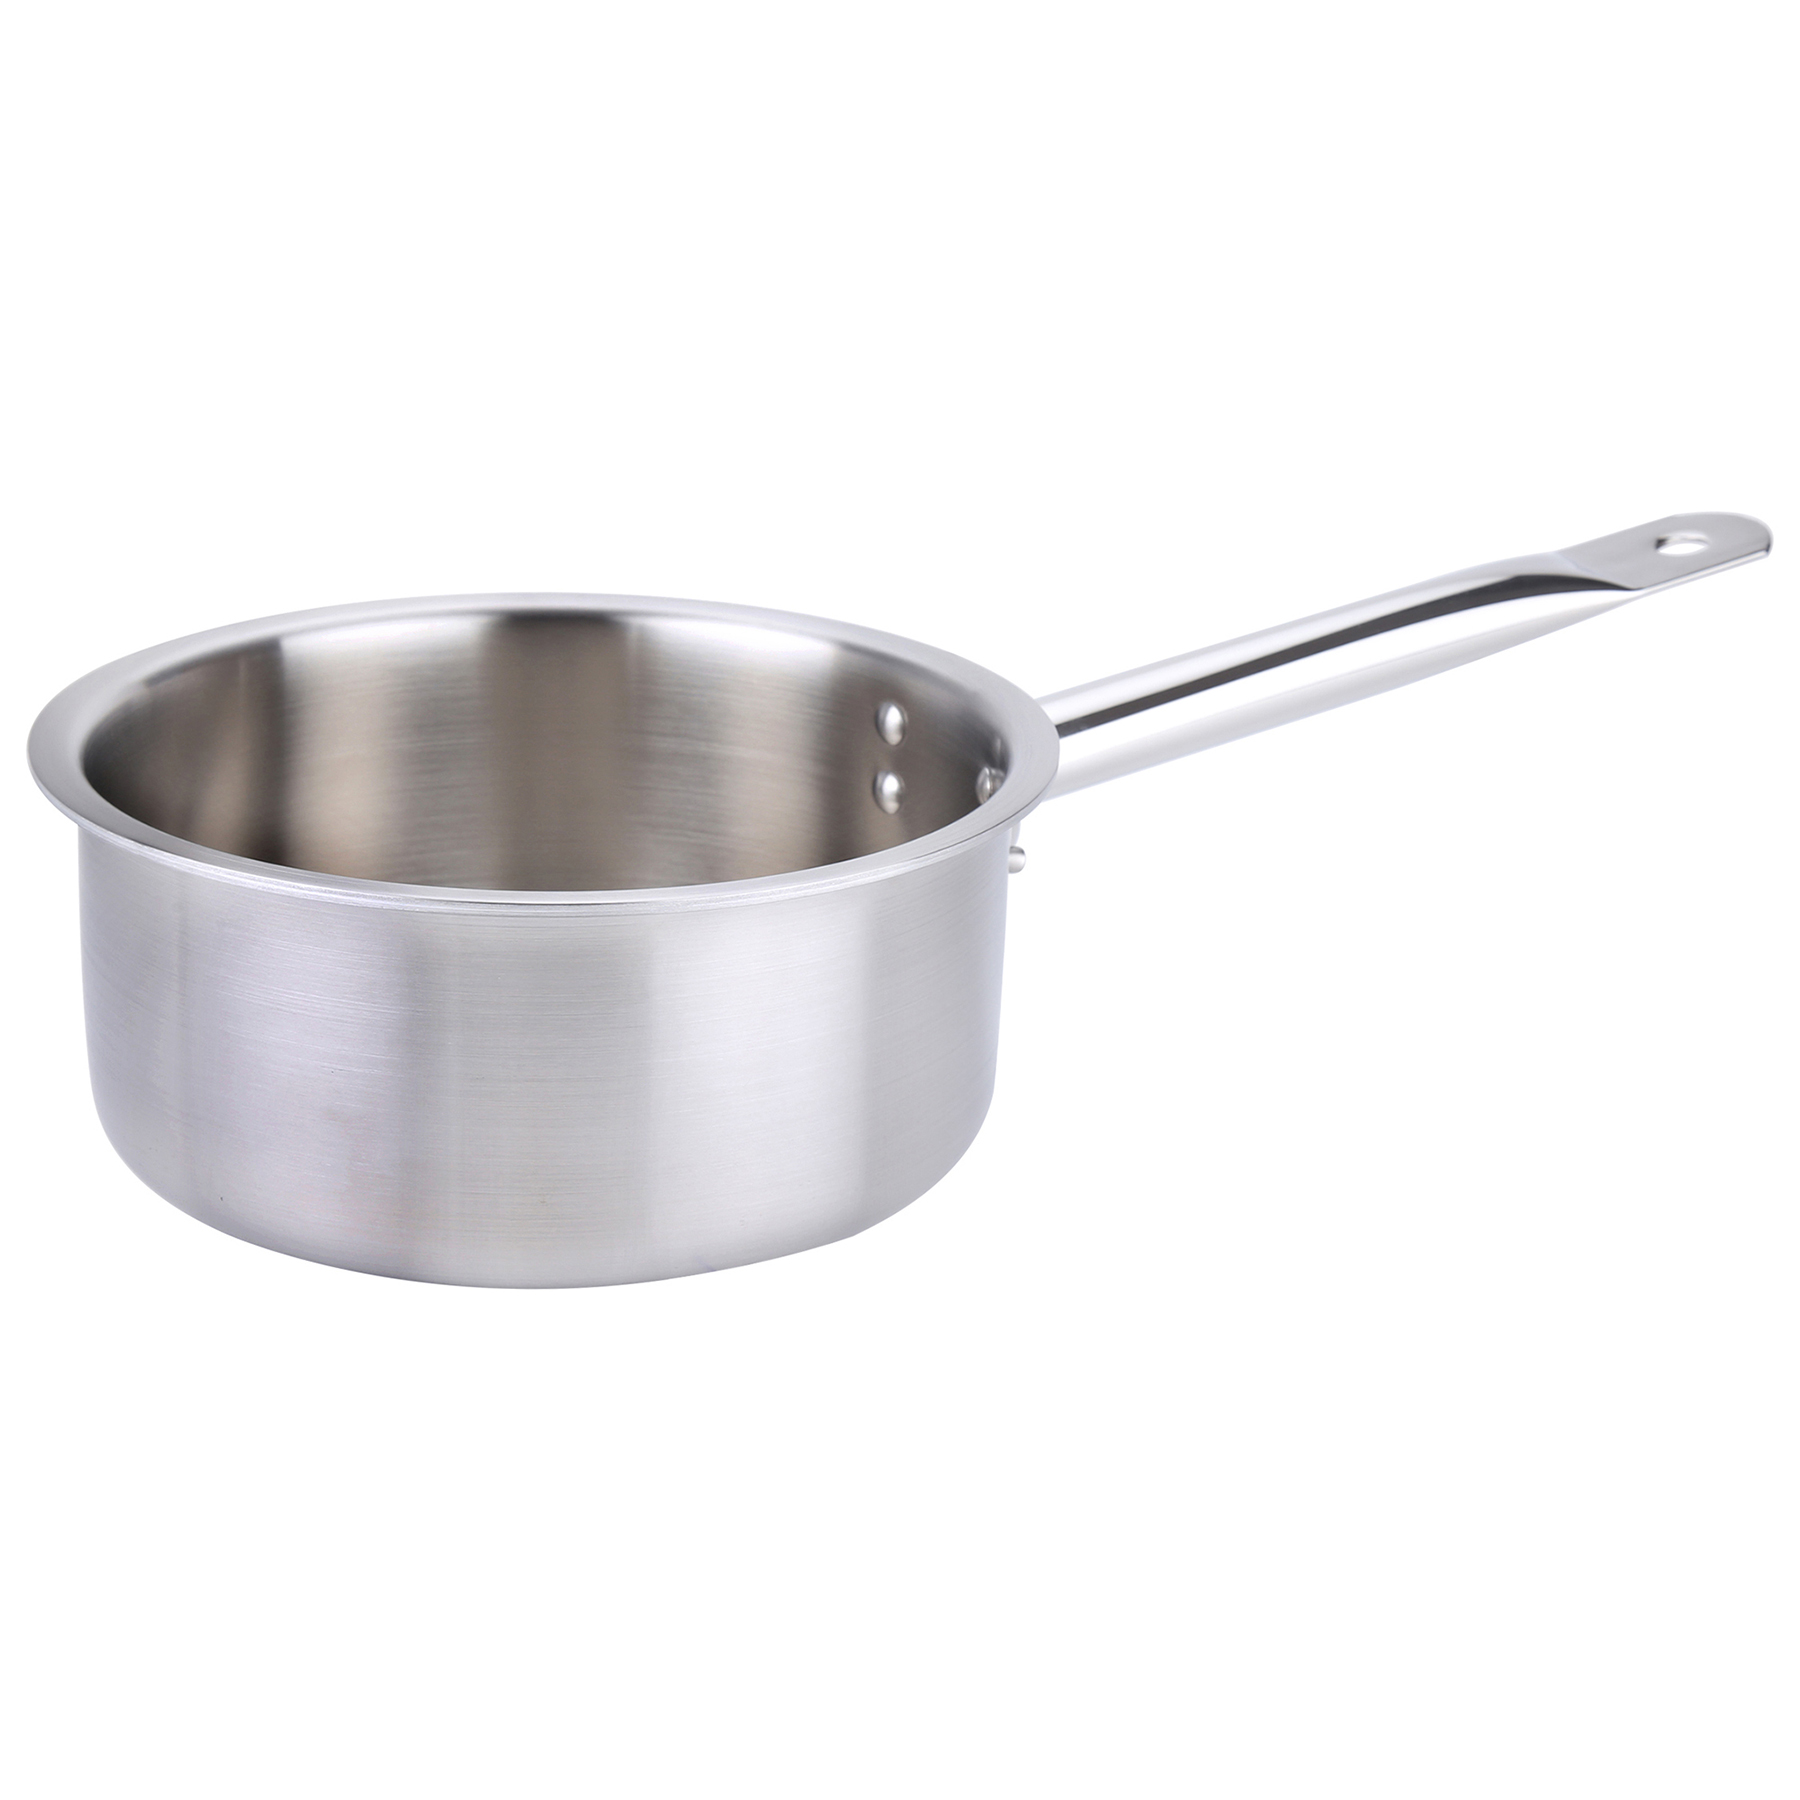 https://stecindia.co.in/wp-content/uploads/2020/11/Avon-Professional-Cookware-Tri-ply-Low-Sauce-Pan-1.jpg